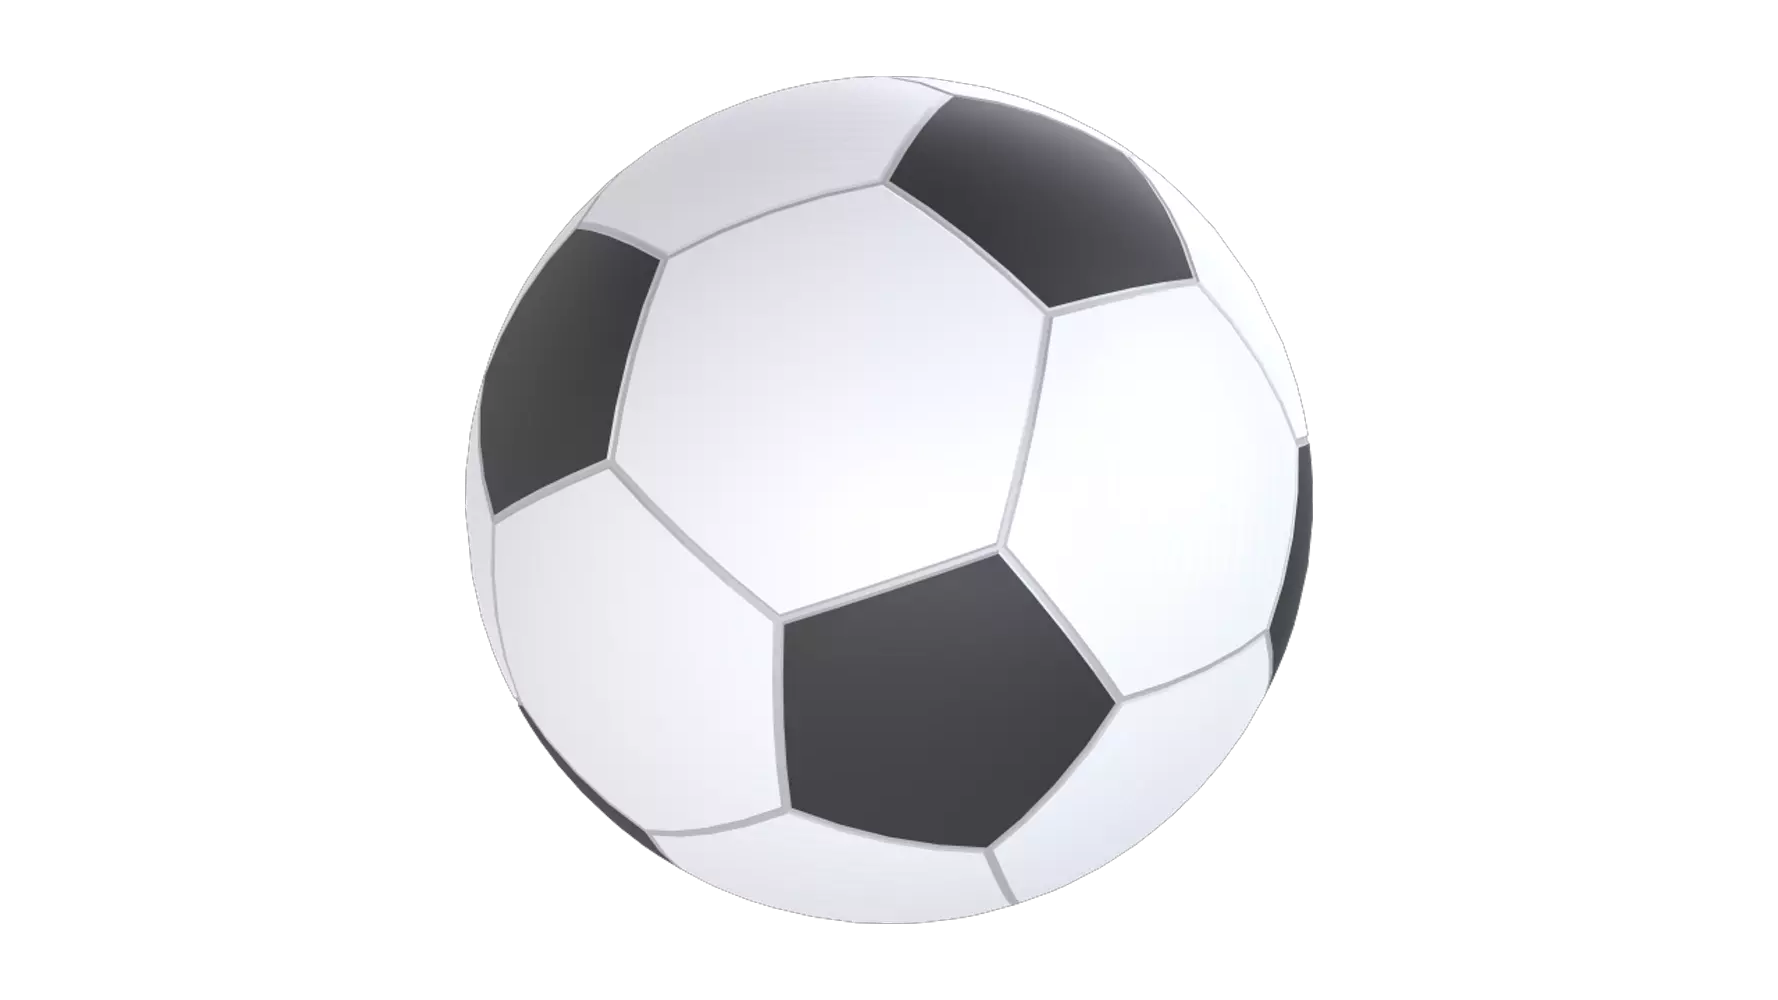 Football 3D Graphic